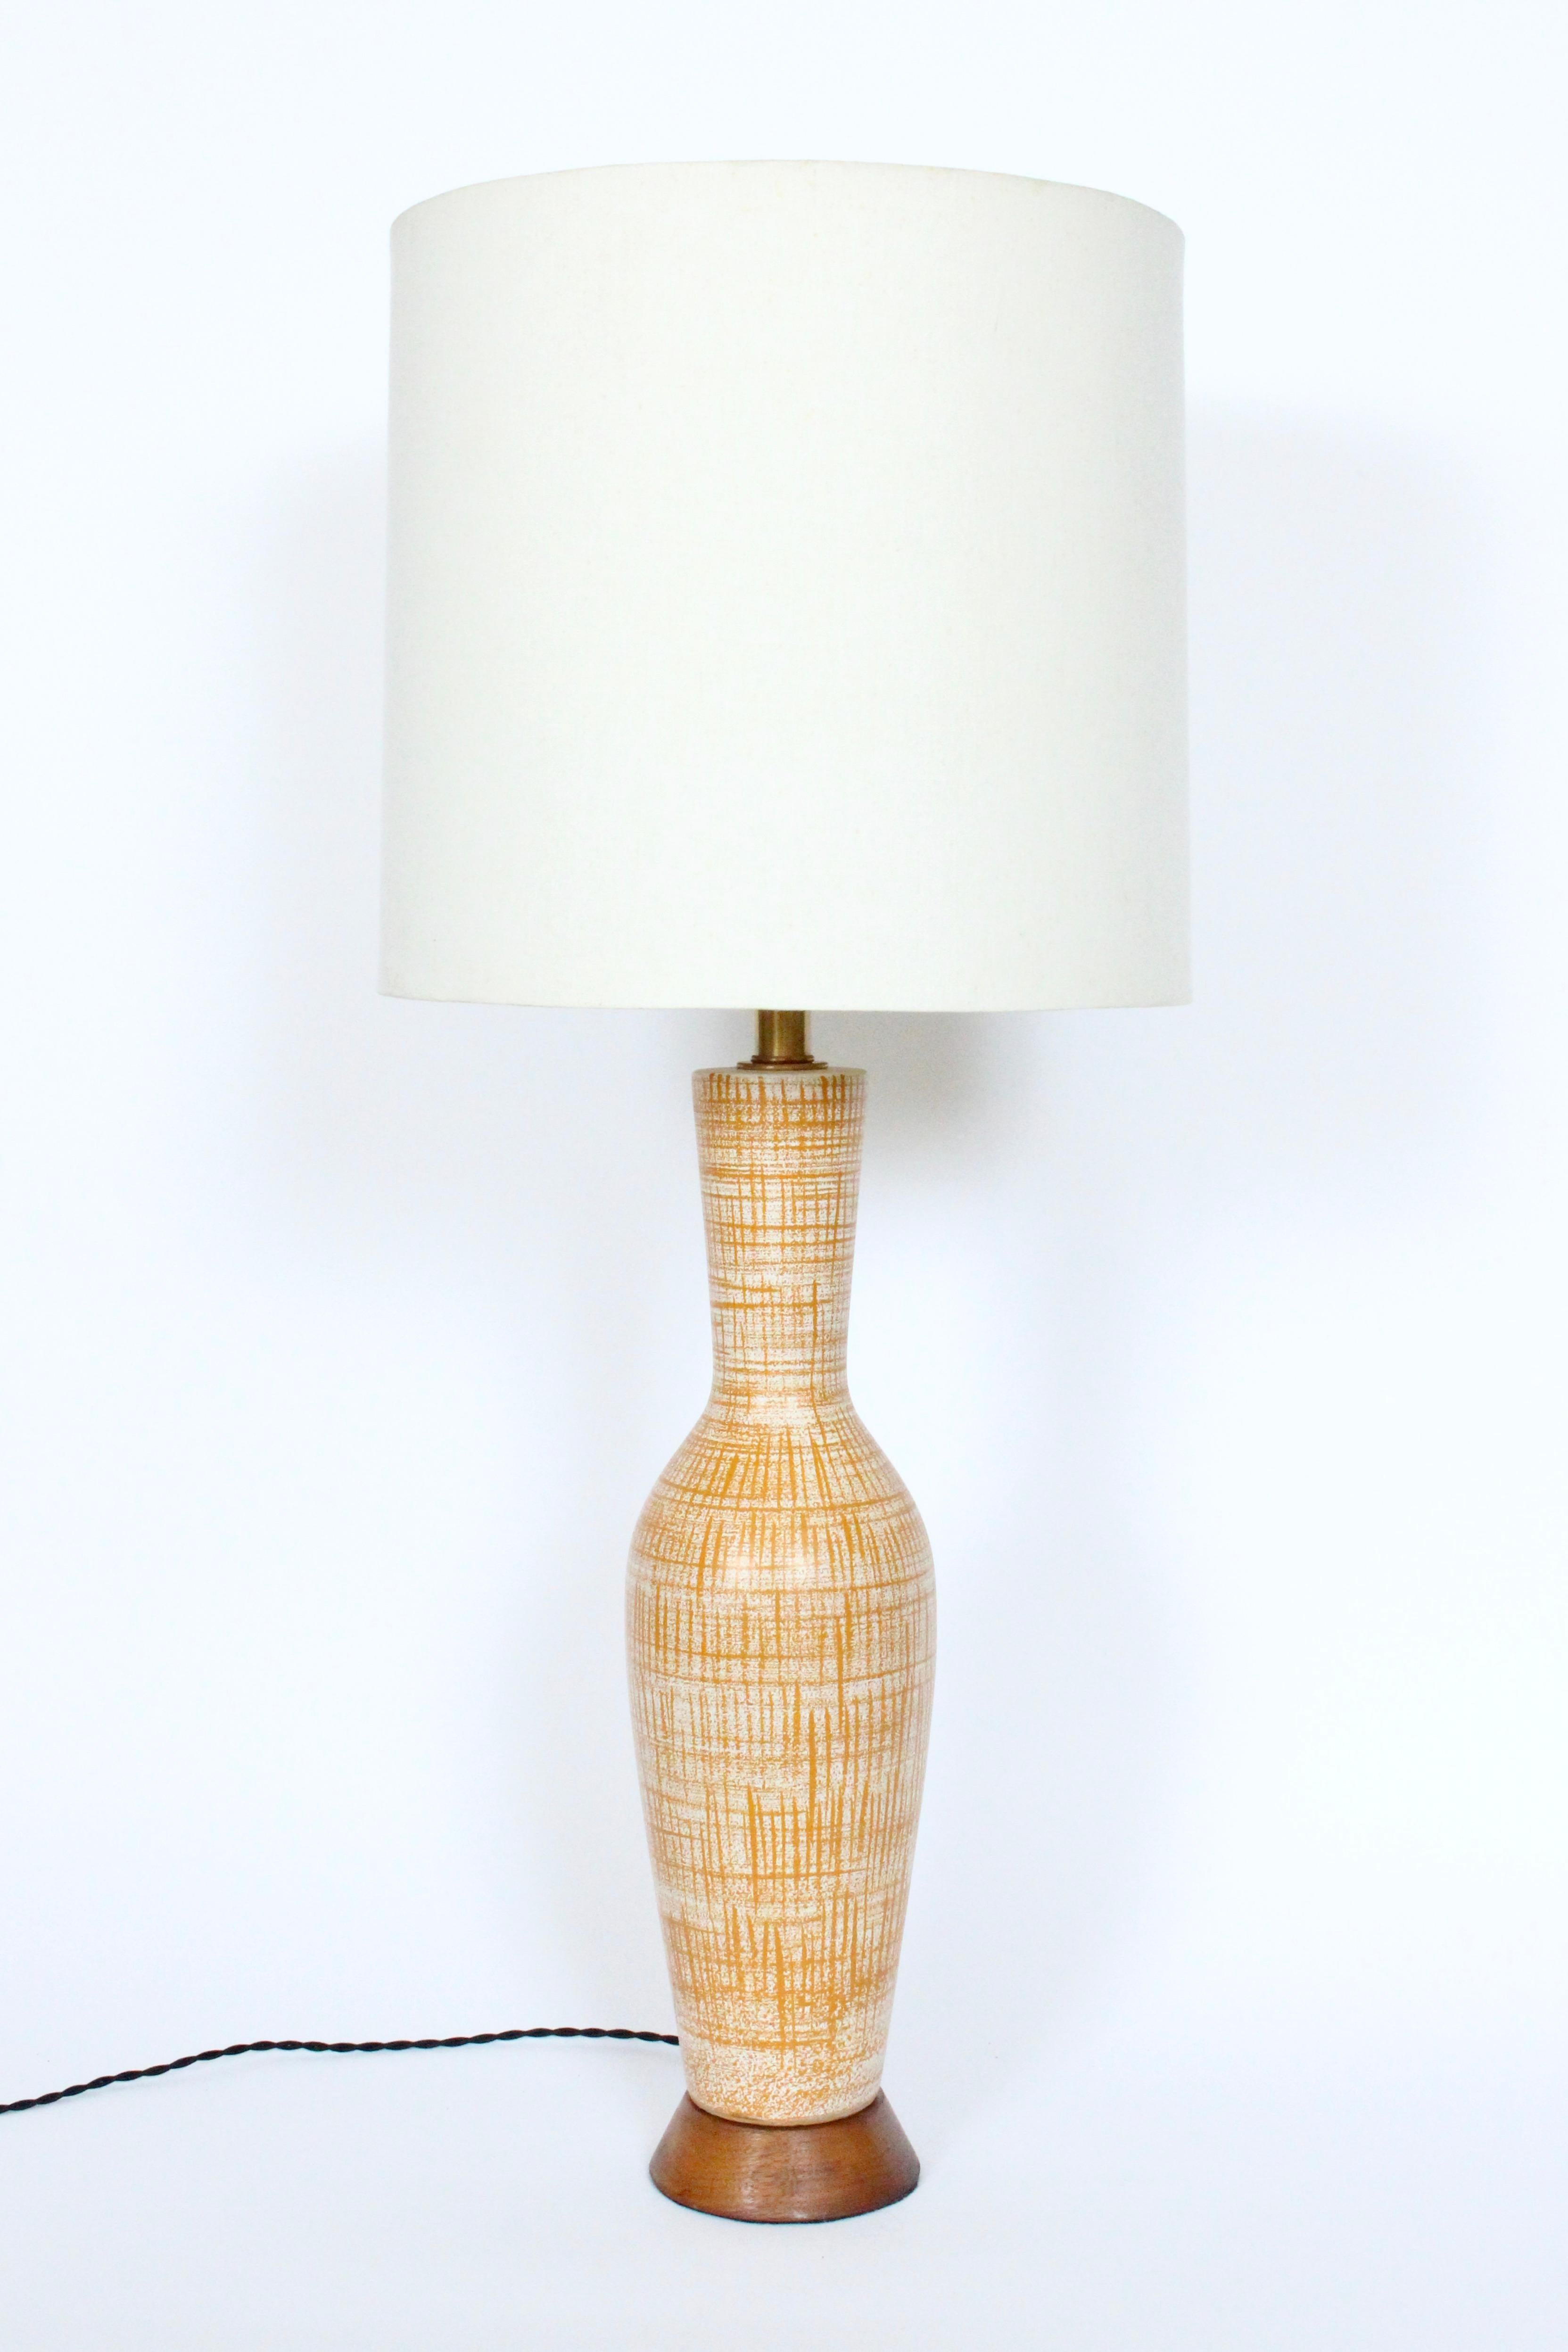 Monumental Design-Technics neutral glazed art pottery table lamp, 1960's. Featuring a pop of color on this classic handcrafted Design Technics Off White Ceramic form, hand painted with Dark Mustard Orange thinly lined criss cross pattern. A top a